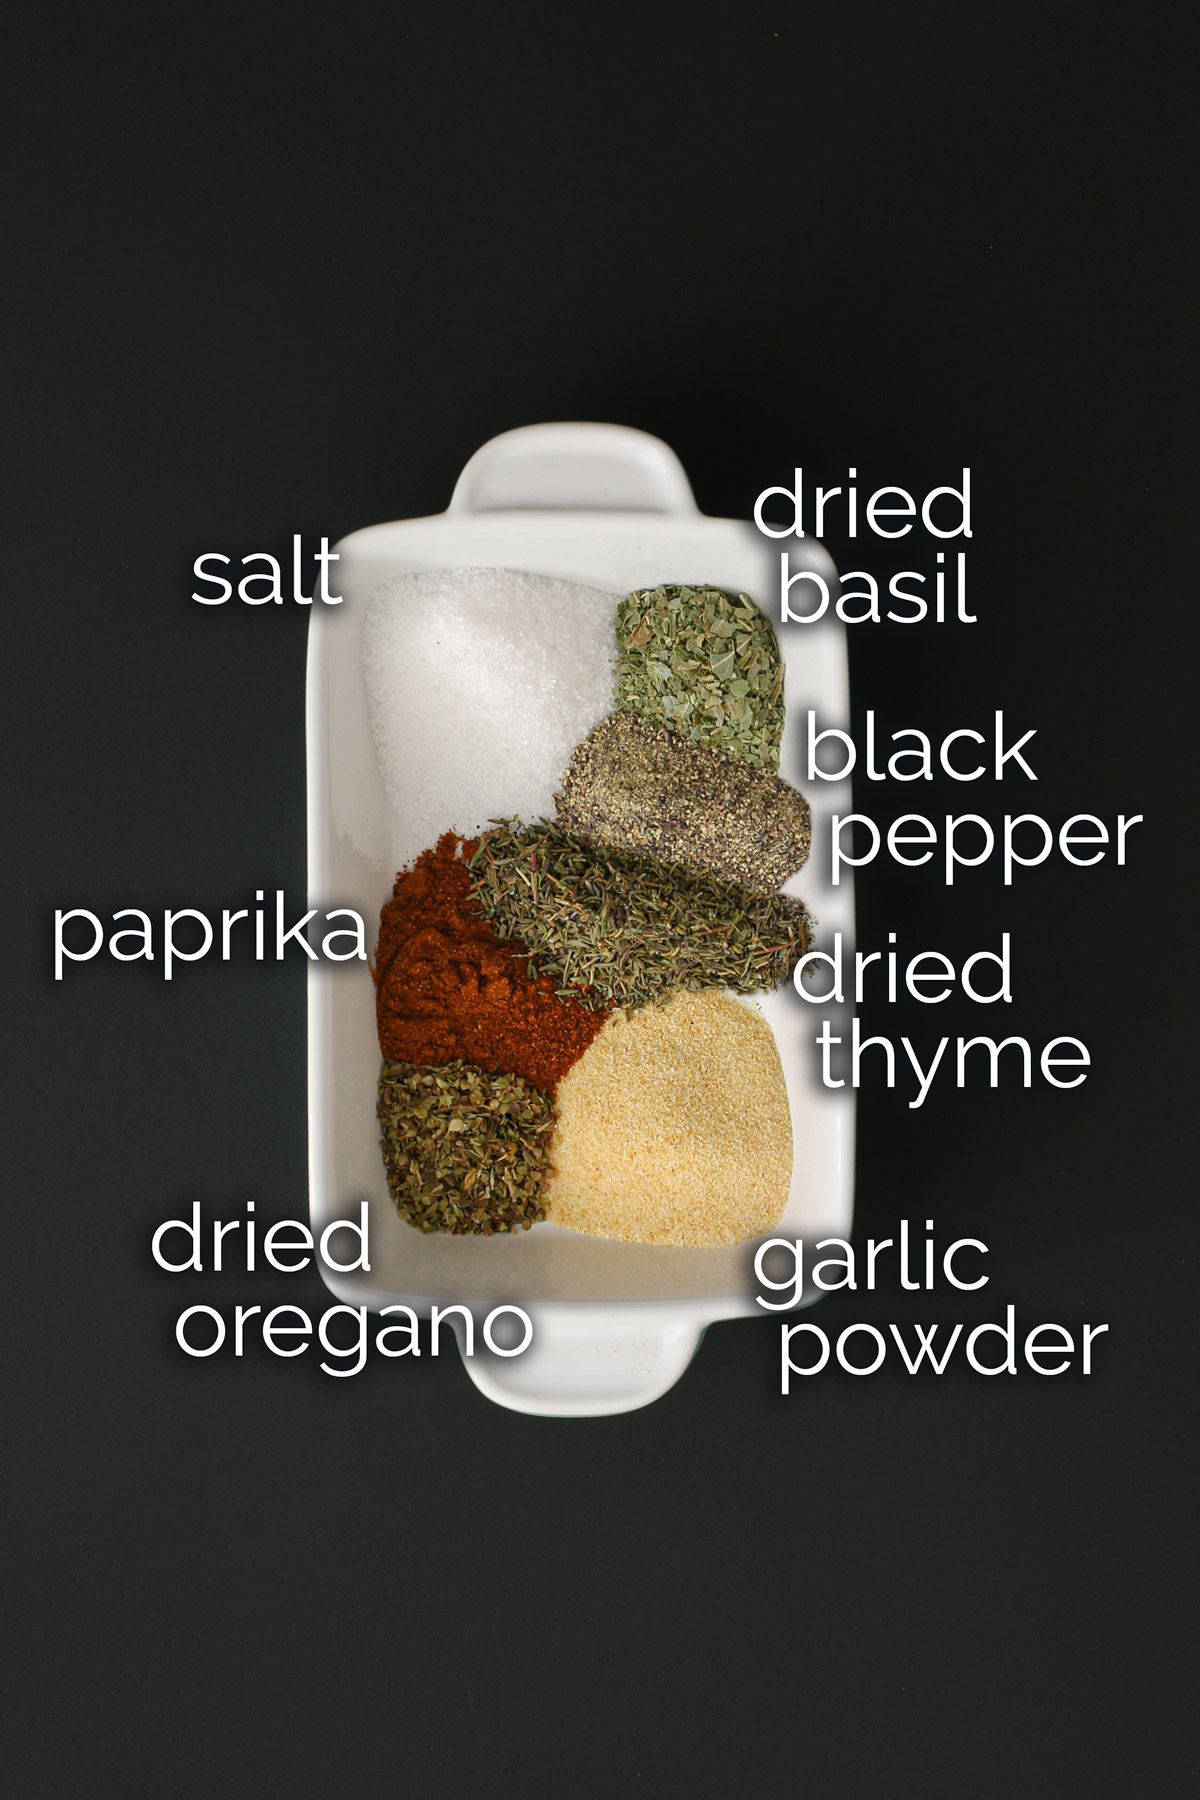 ingredients for seasoned salt measured out in a large white dish.